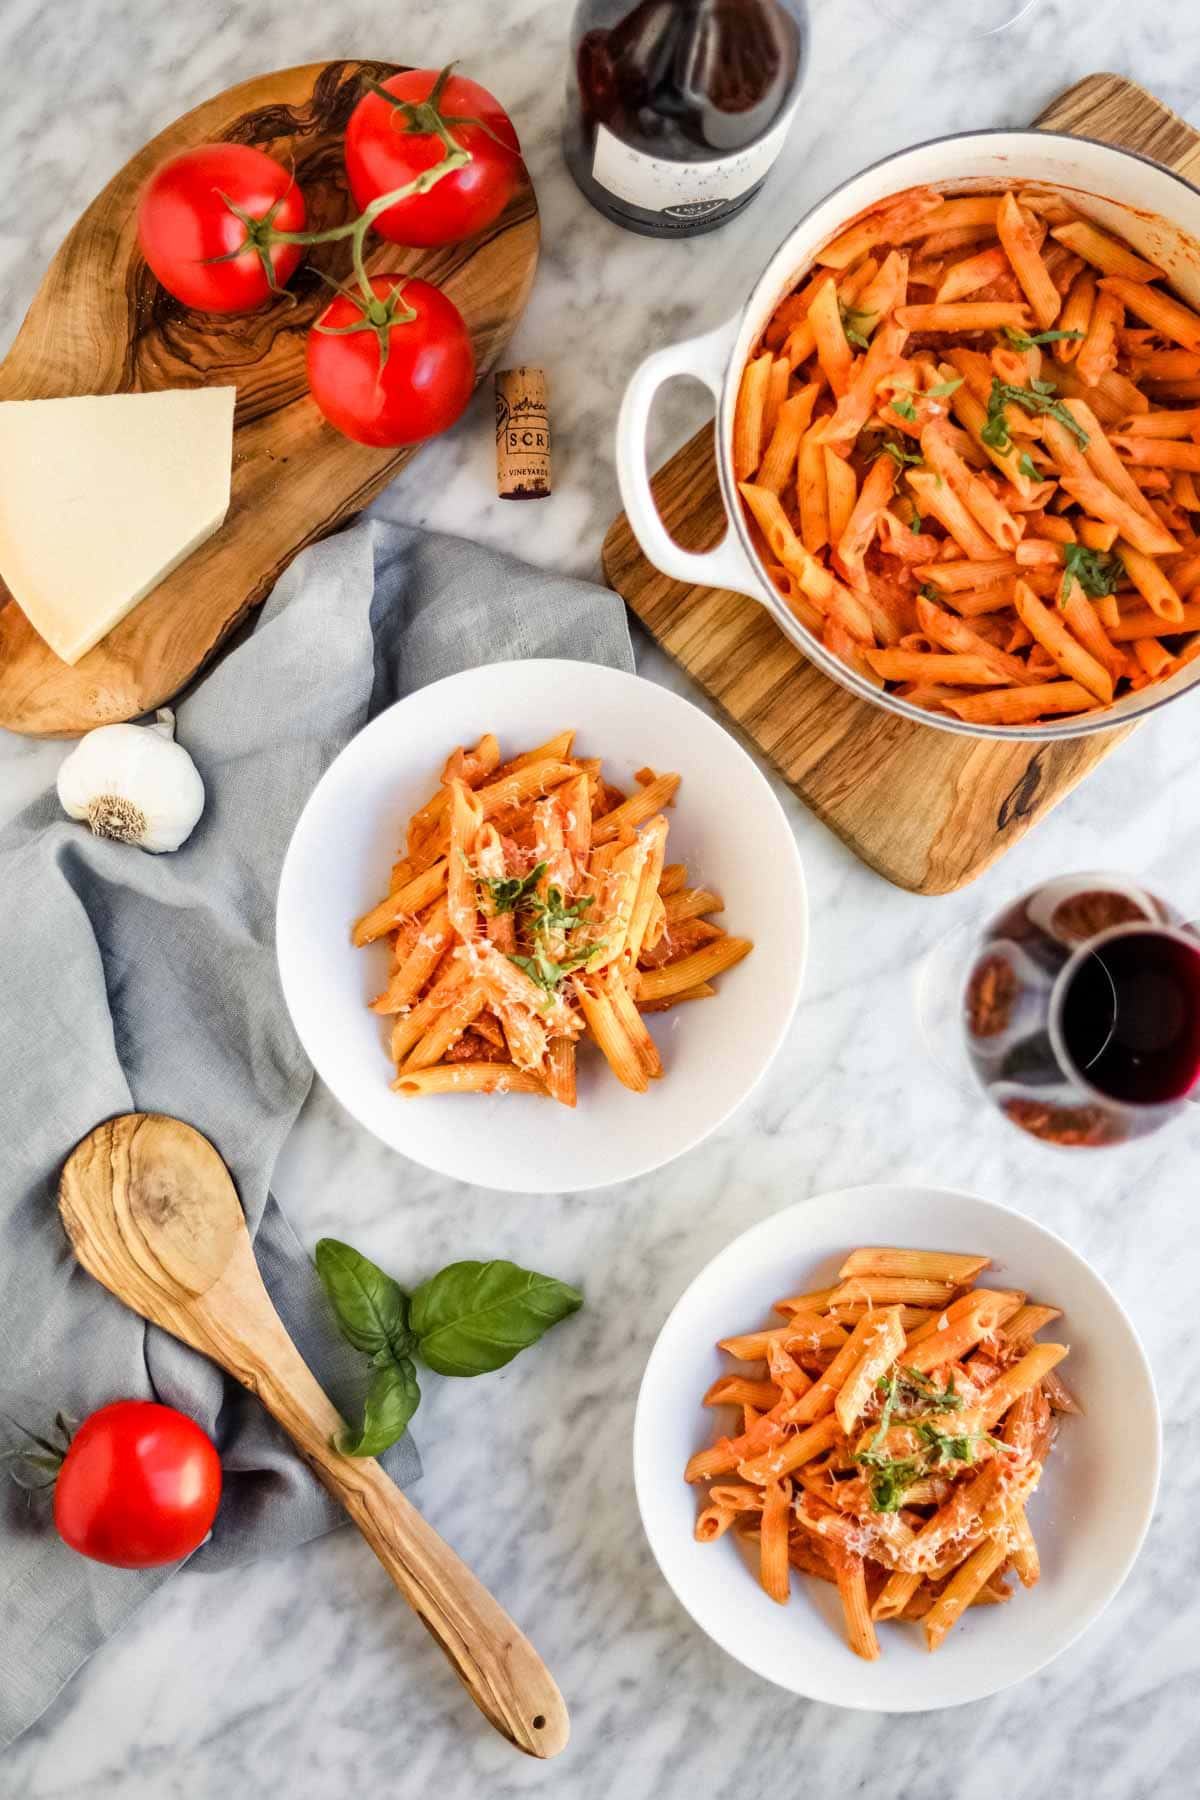 Penne pasta with vodka sauce in white bowls and dutch oven with wine, basil, garlic, tomatoes and cheese.